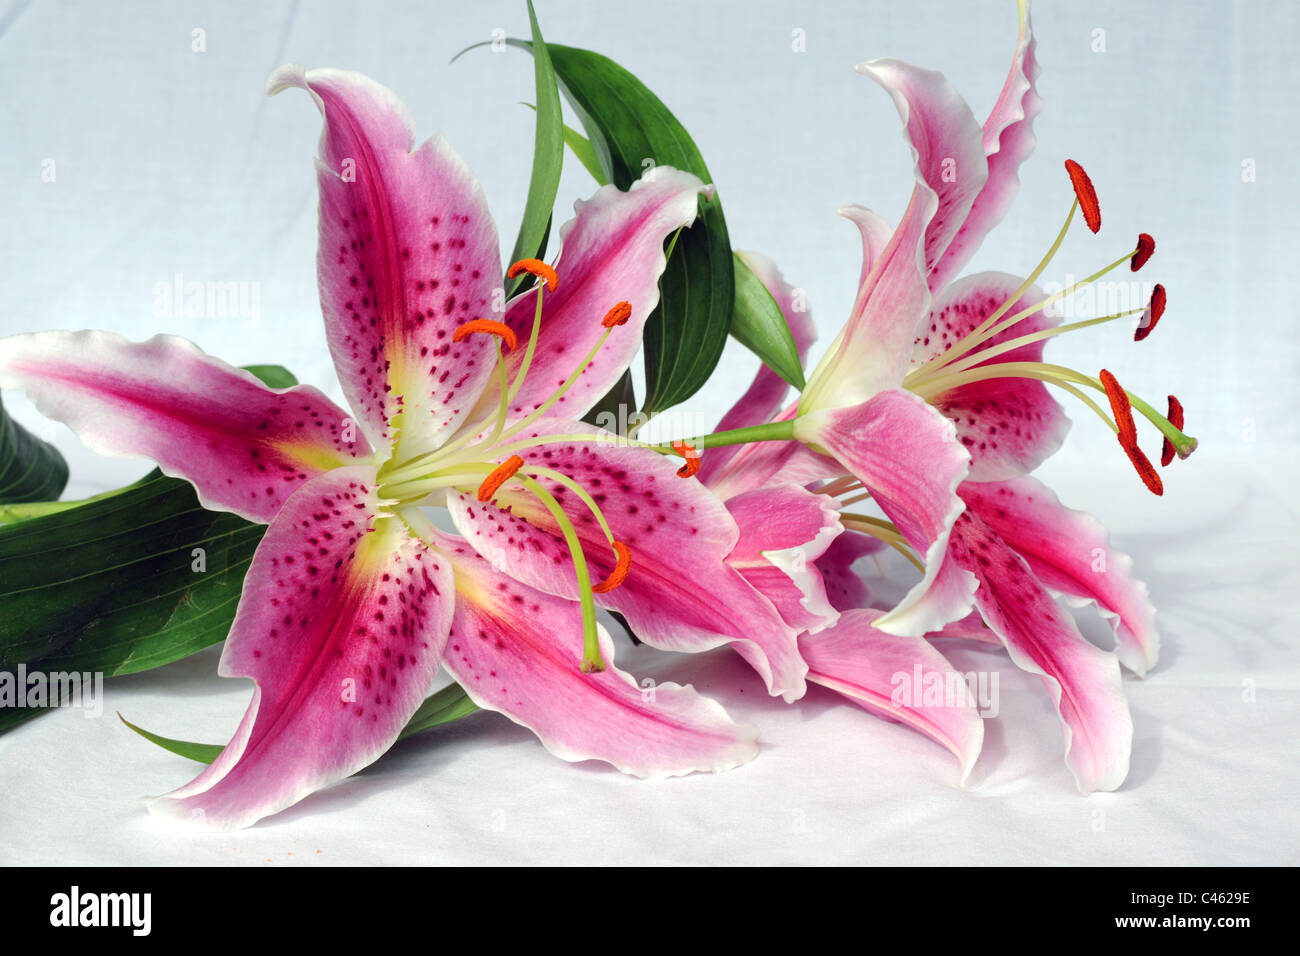 Two pink / cerise / white lillies on a green stem laid down on a table against a plain white surround. Front and profile view Stock Photo